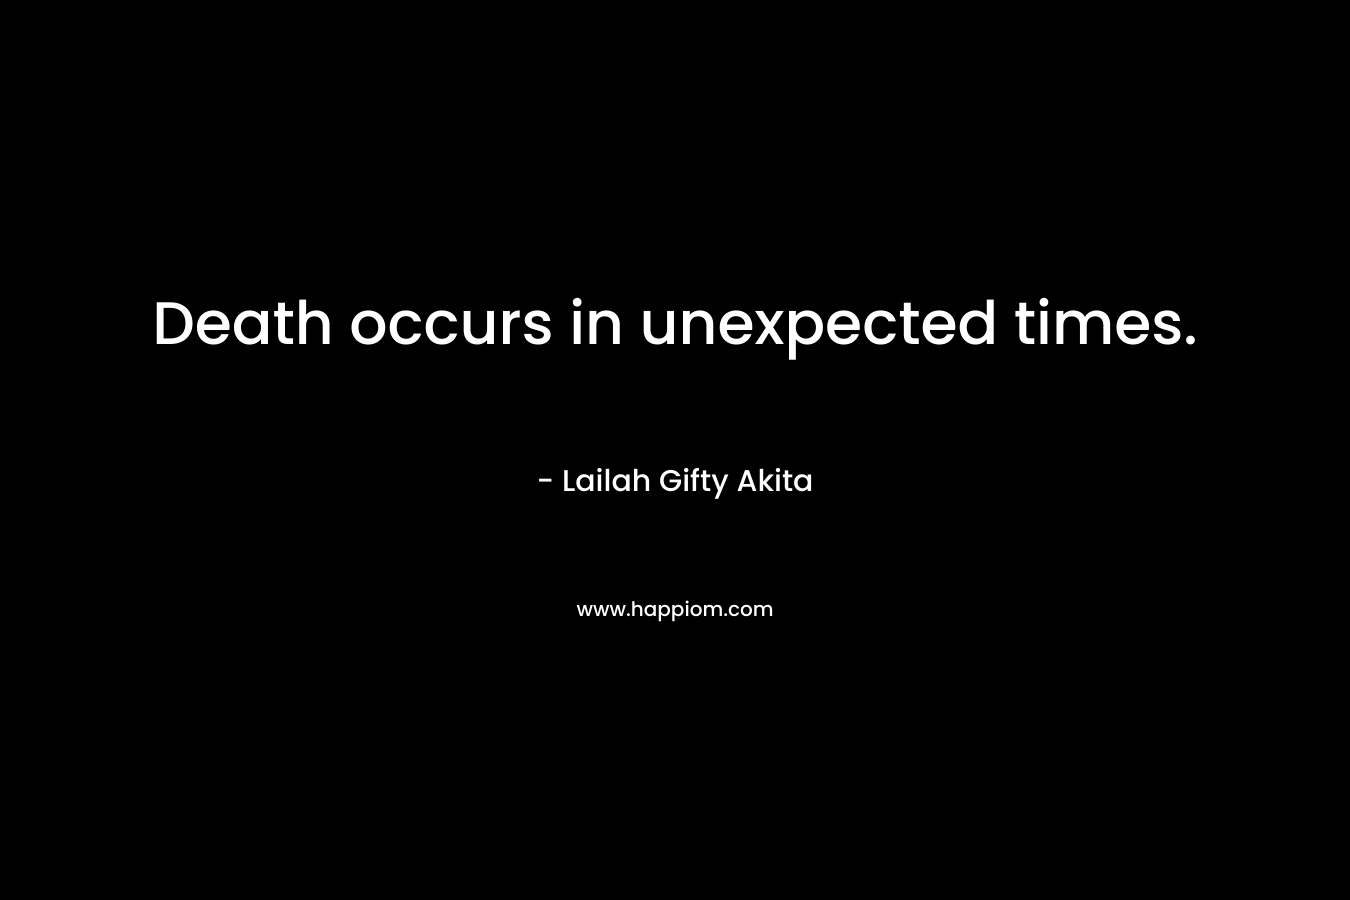 Death occurs in unexpected times.